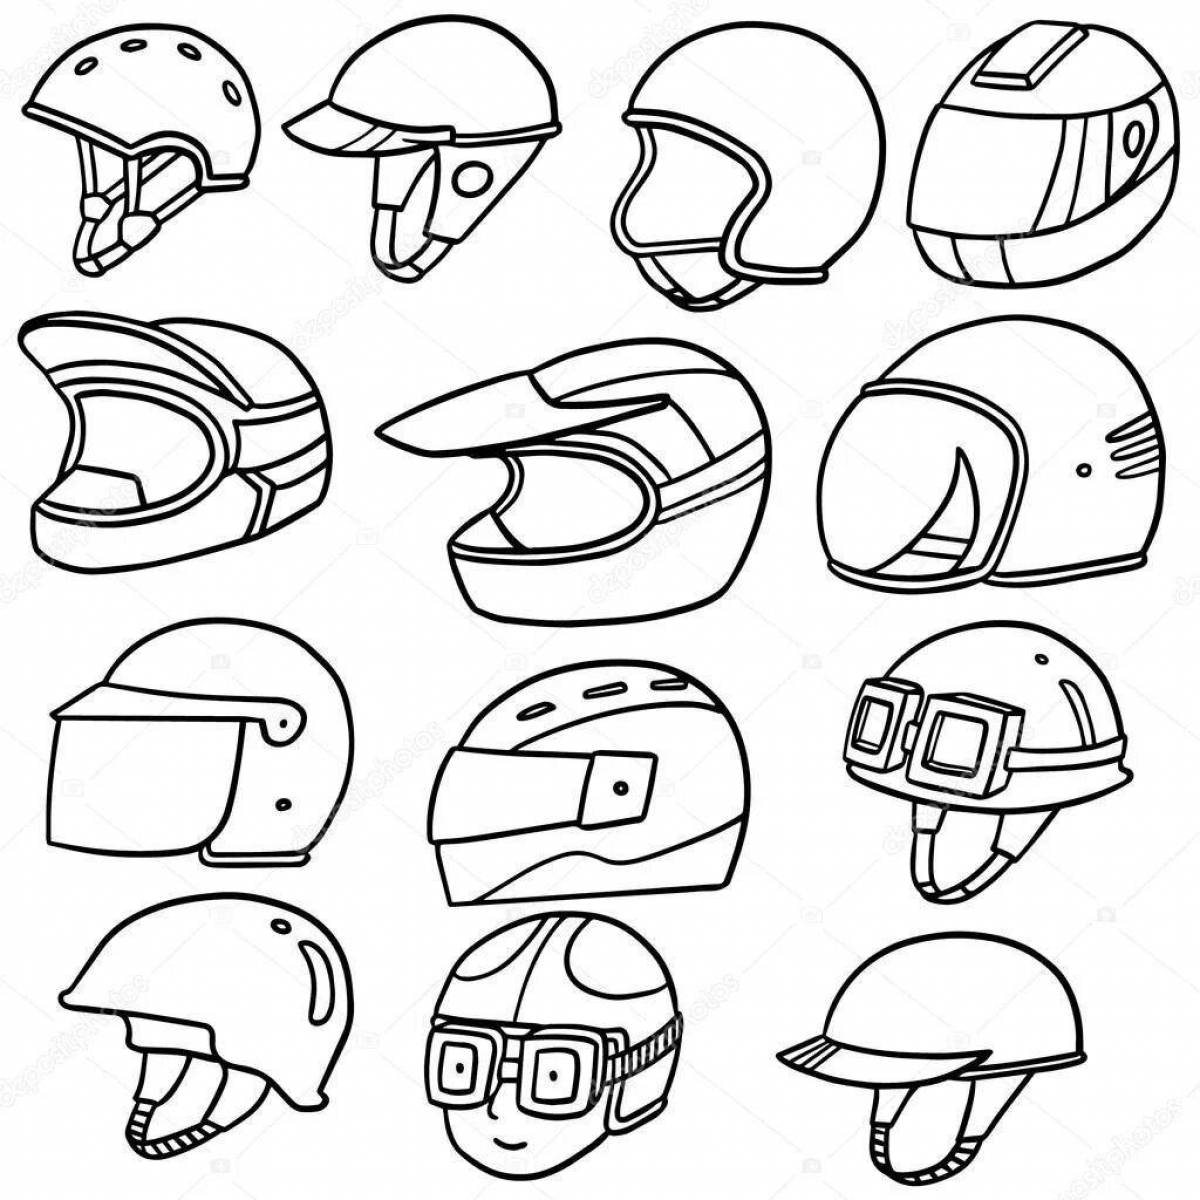 Coloring page amazing motorcycle helmet